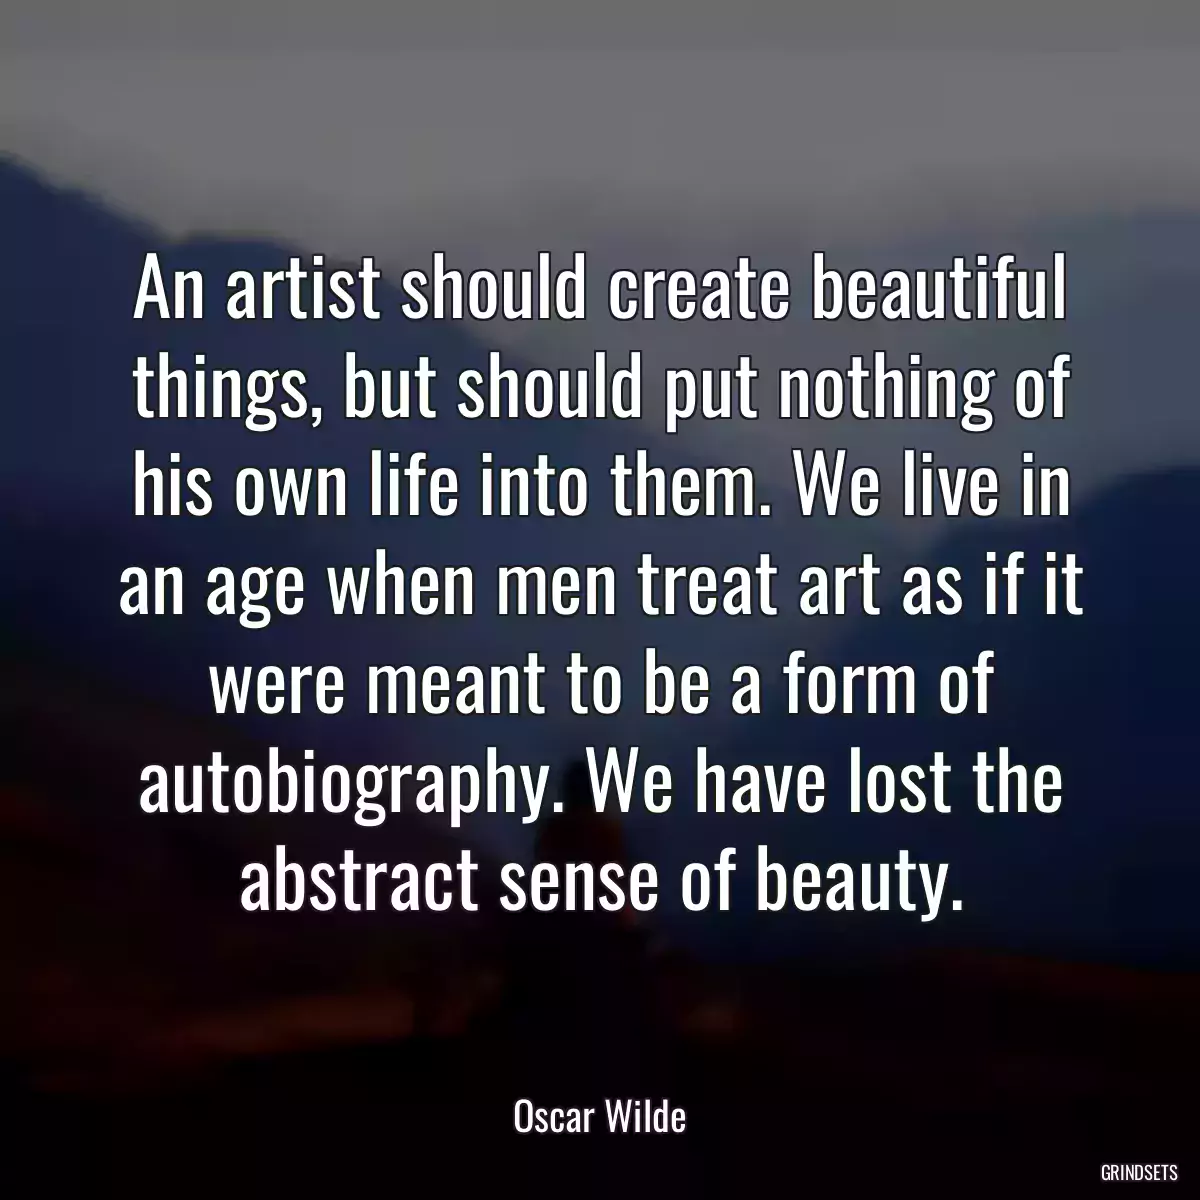 An artist should create beautiful things, but should put nothing of his own life into them. We live in an age when men treat art as if it were meant to be a form of autobiography. We have lost the abstract sense of beauty.